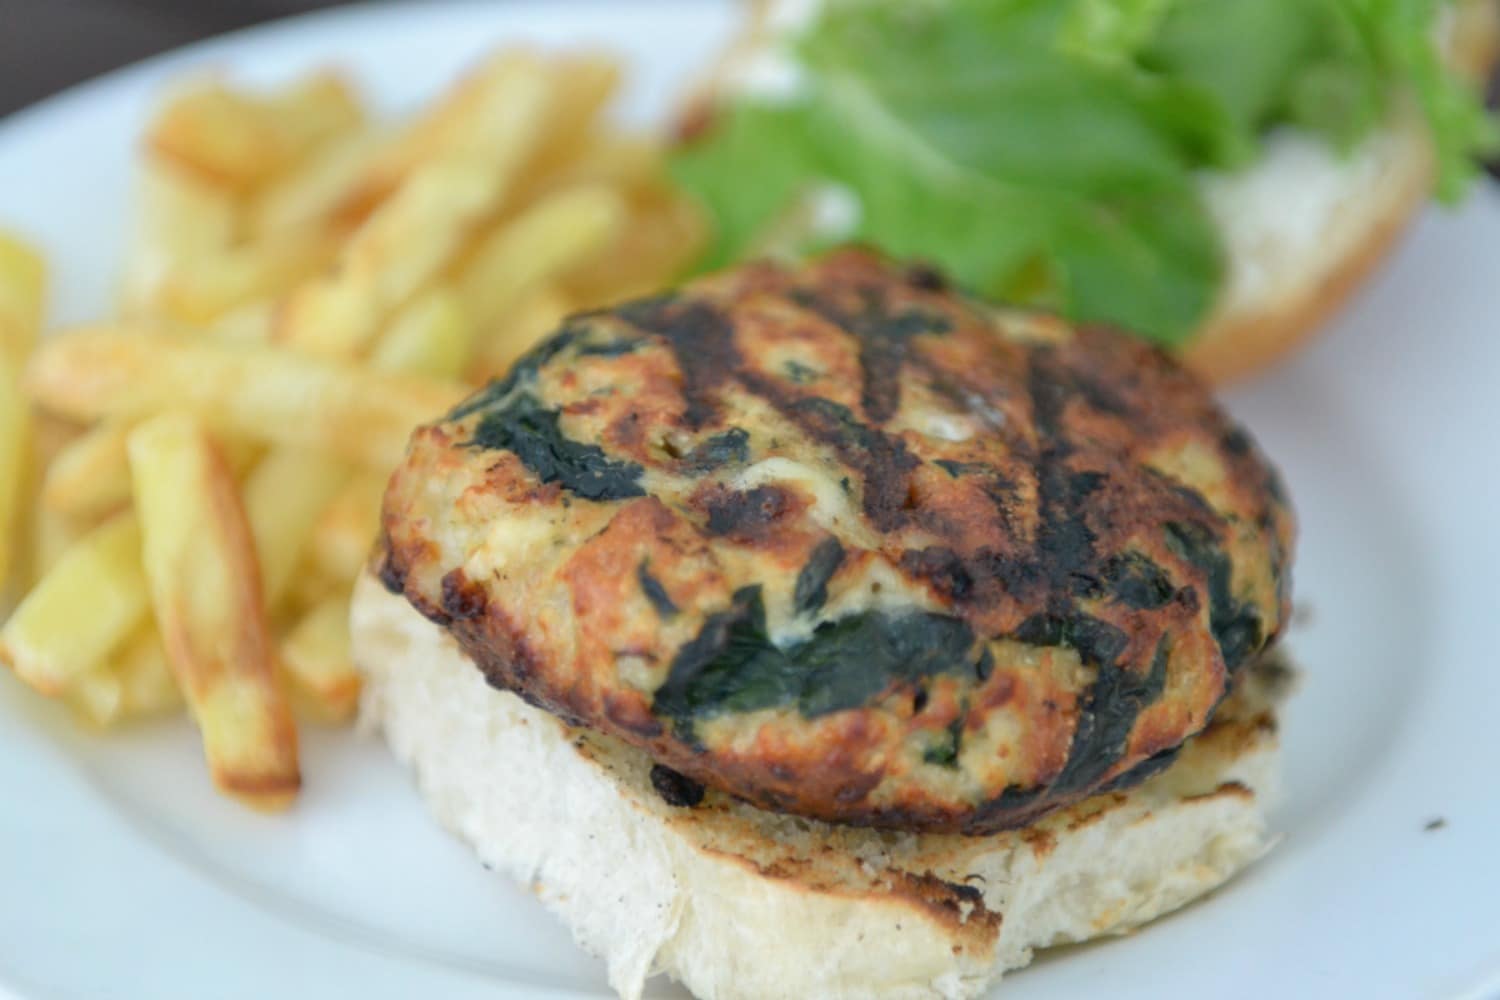 Serve turkey burgers on a bun with a side of french fries!